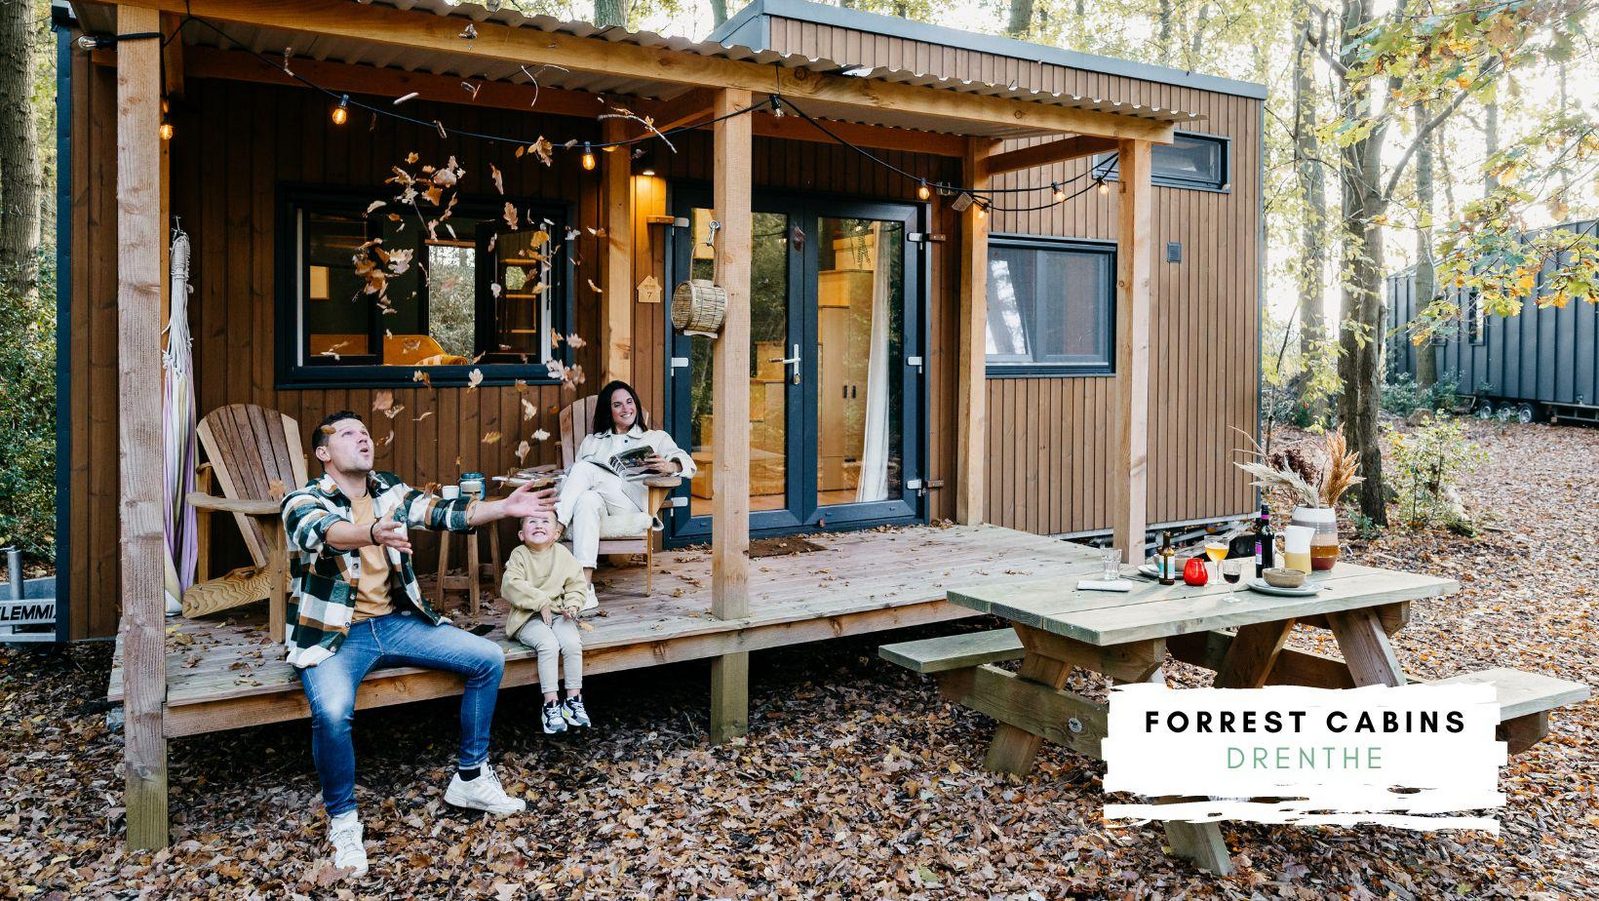 The Forest Cabins